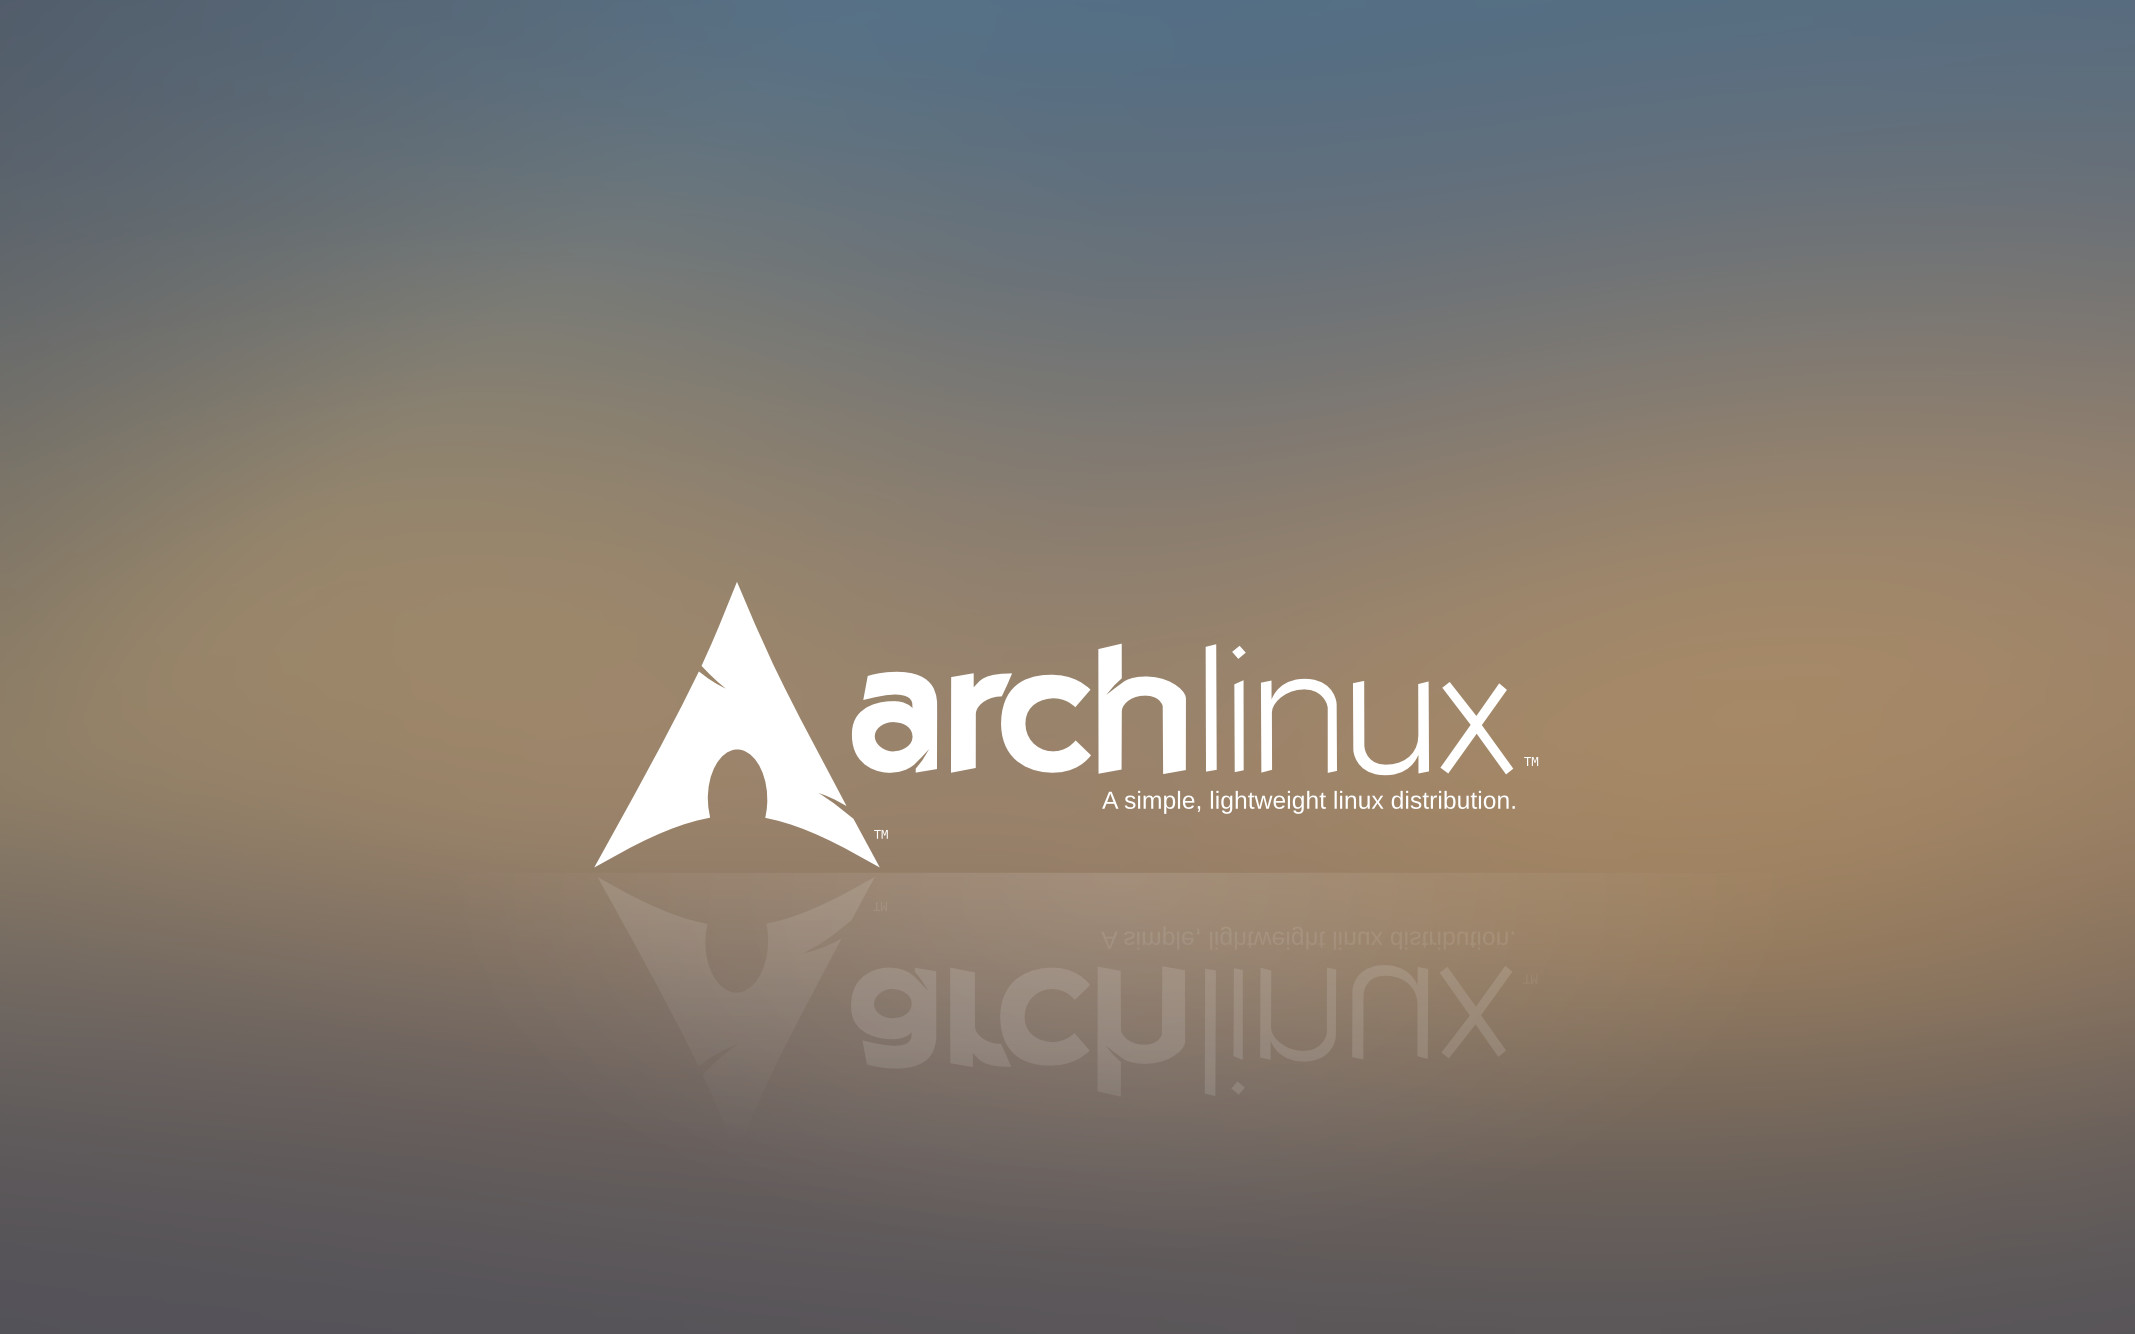 Arch Linux Wallpapers  Wallpaper Cave